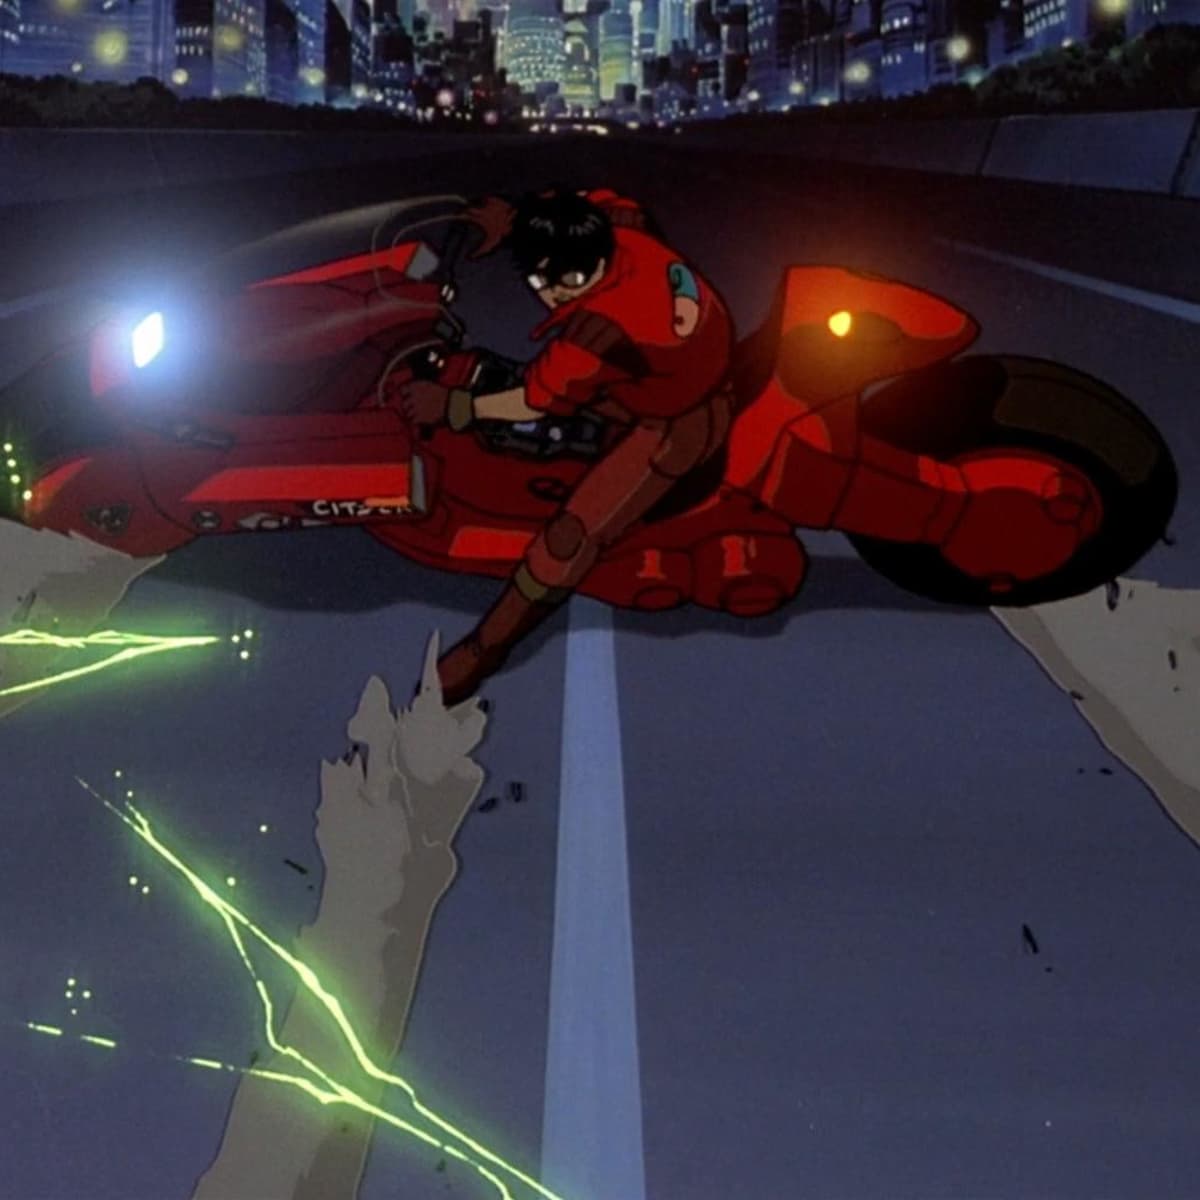 Why is Akira considered one of the greatest animated films of all time   Quora